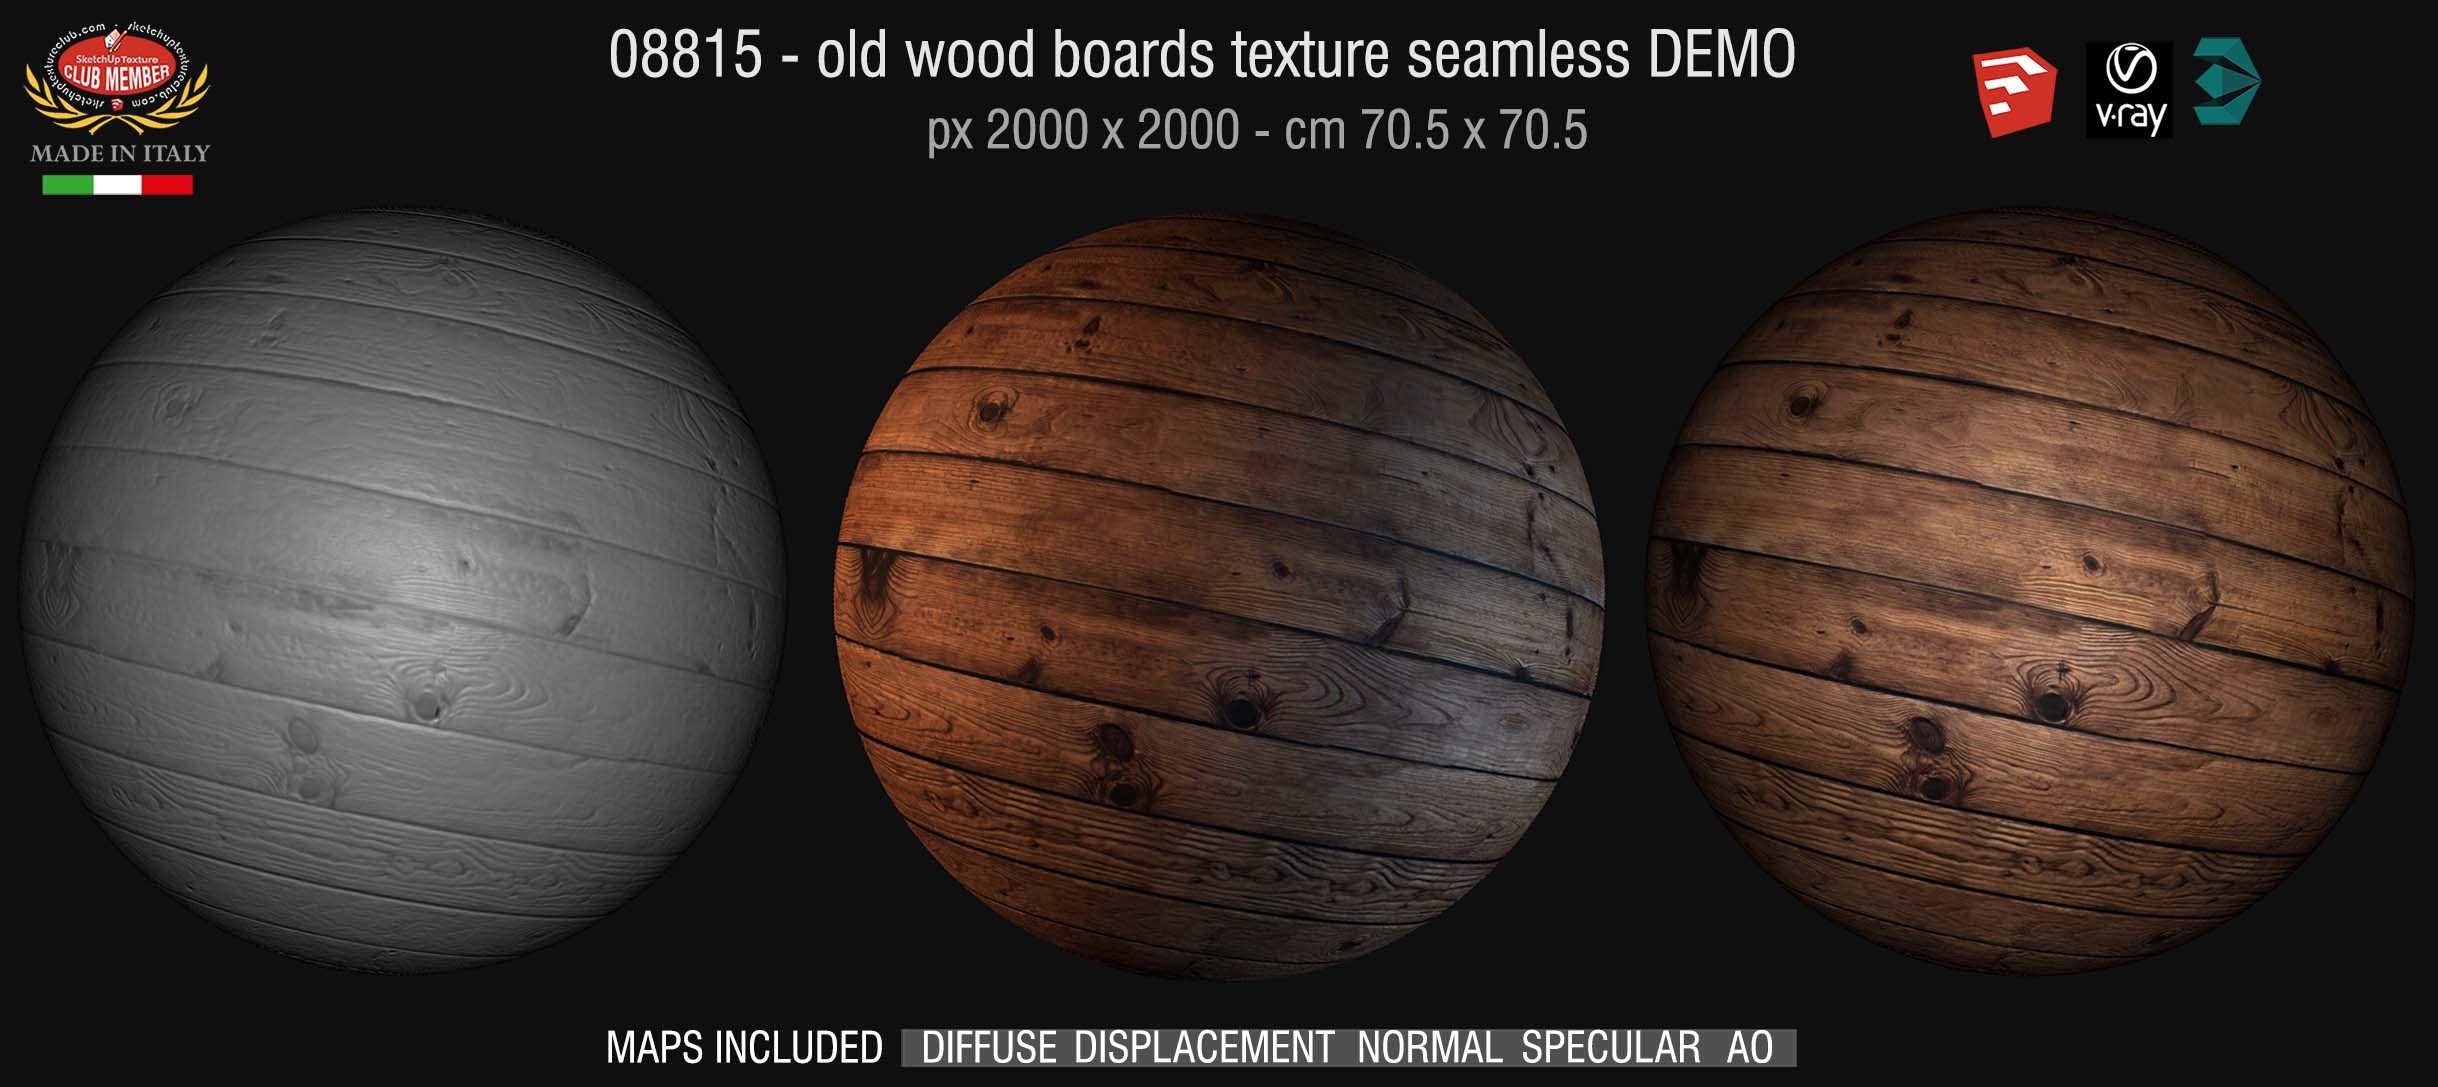 08815 HR Old wood boards texture seamless + maps